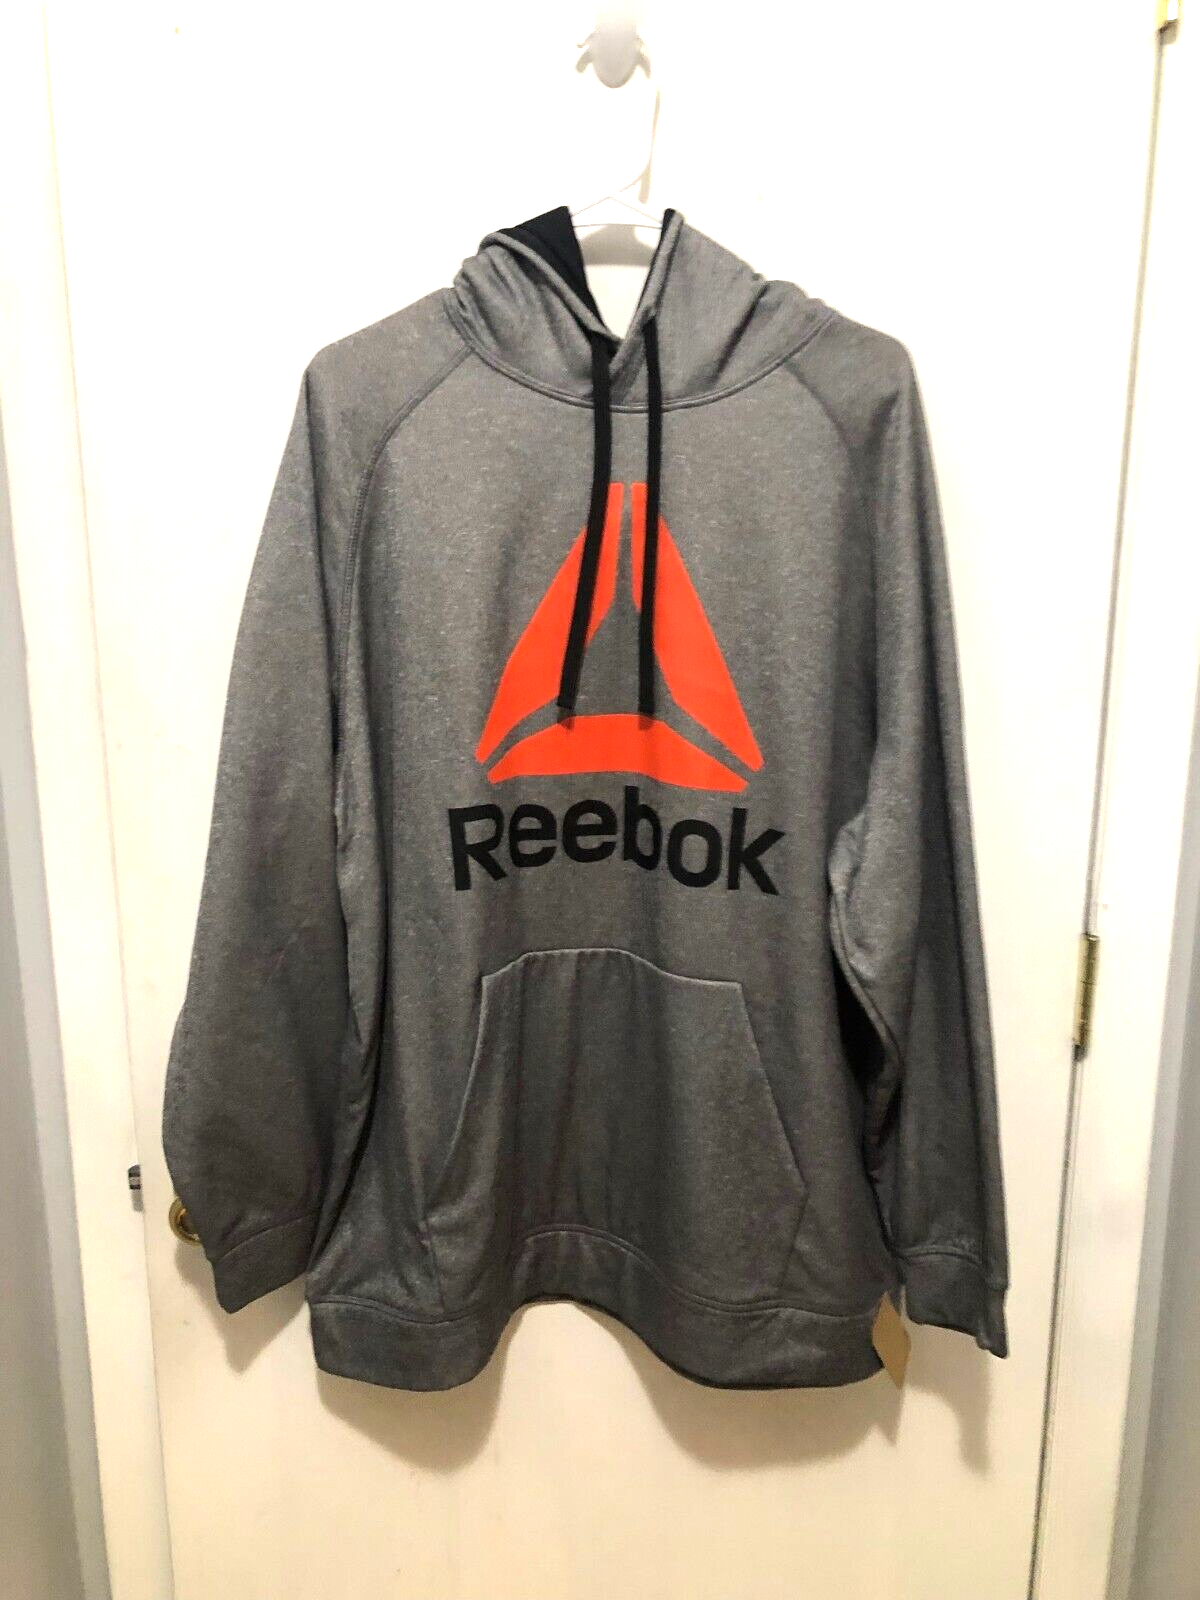 Primary image for NWT Reebok Mens 2XL Large Graphic Pullover Hoodie Fleece Lined Sweatshirt NEW